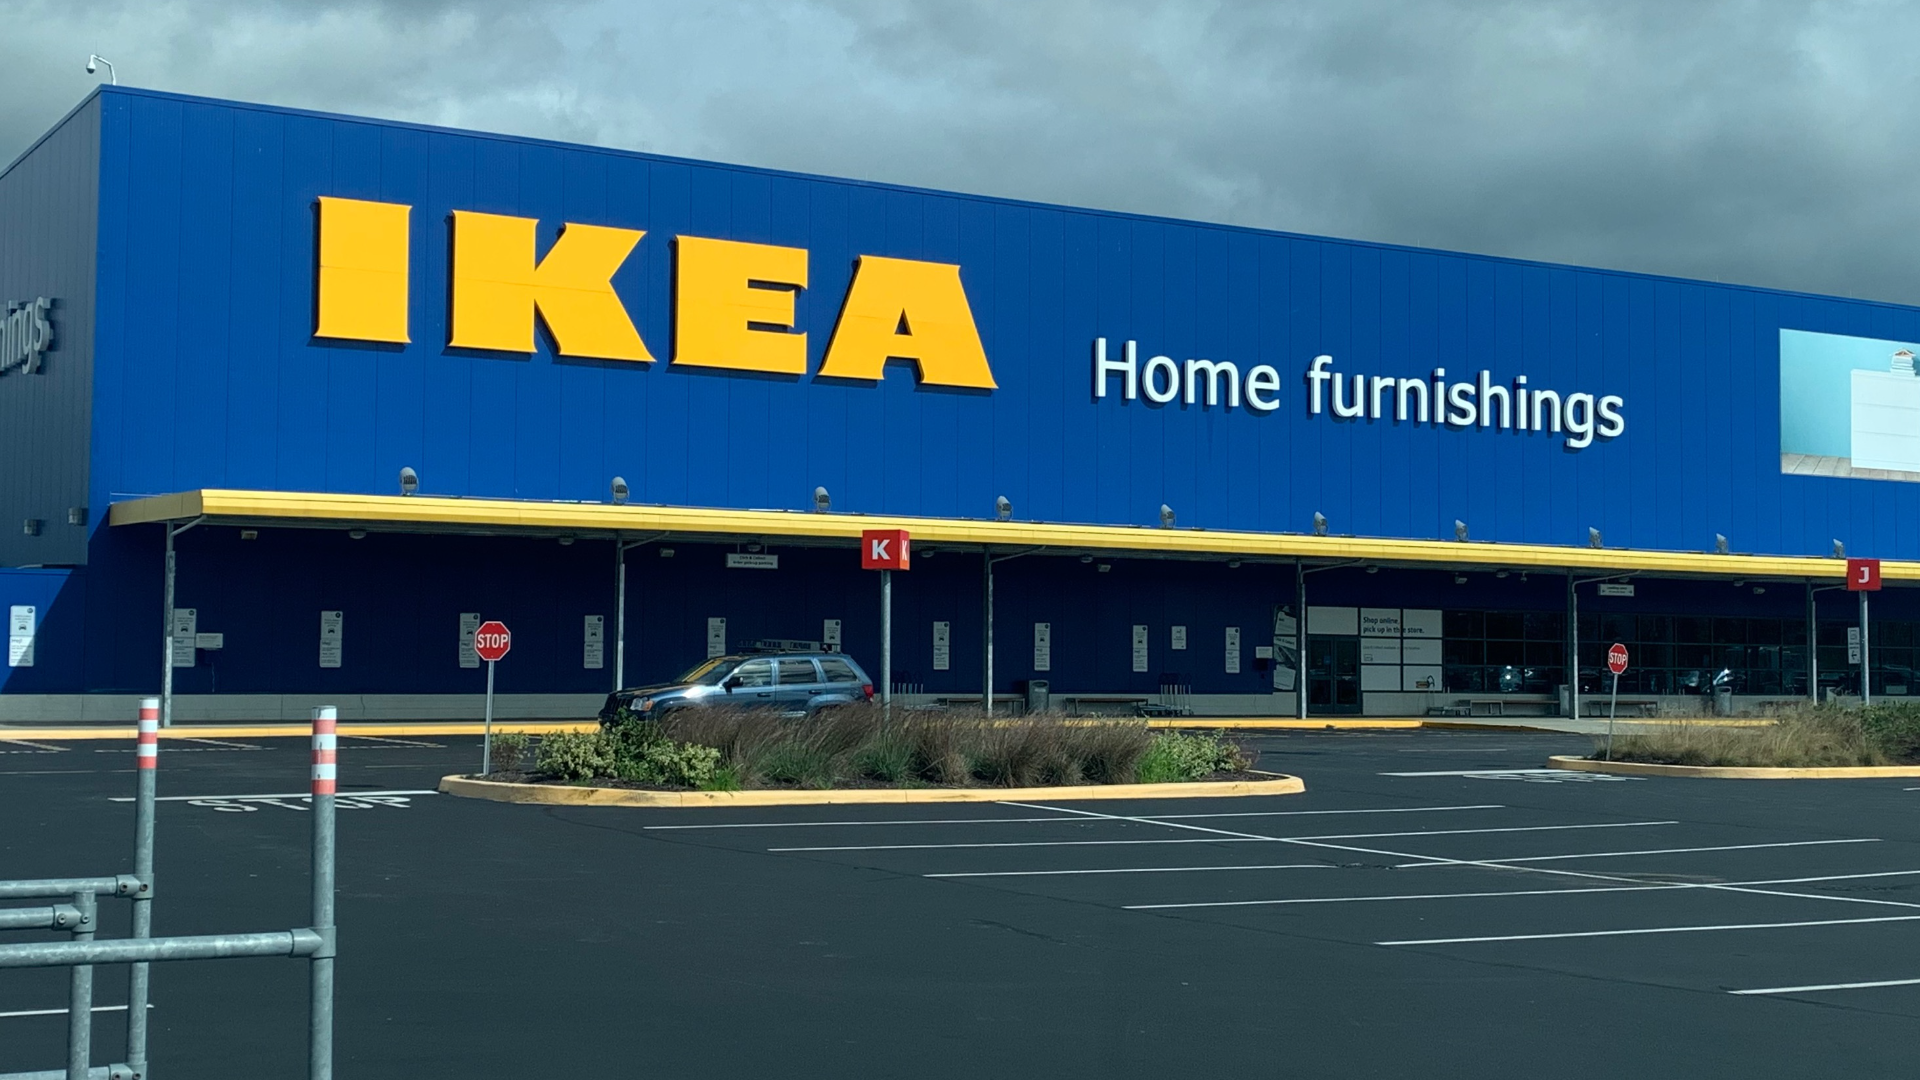 IKEA launched its latest environmental initiative Monday: a new resell service that will be part of the home furnishing retailer's sustainability program.